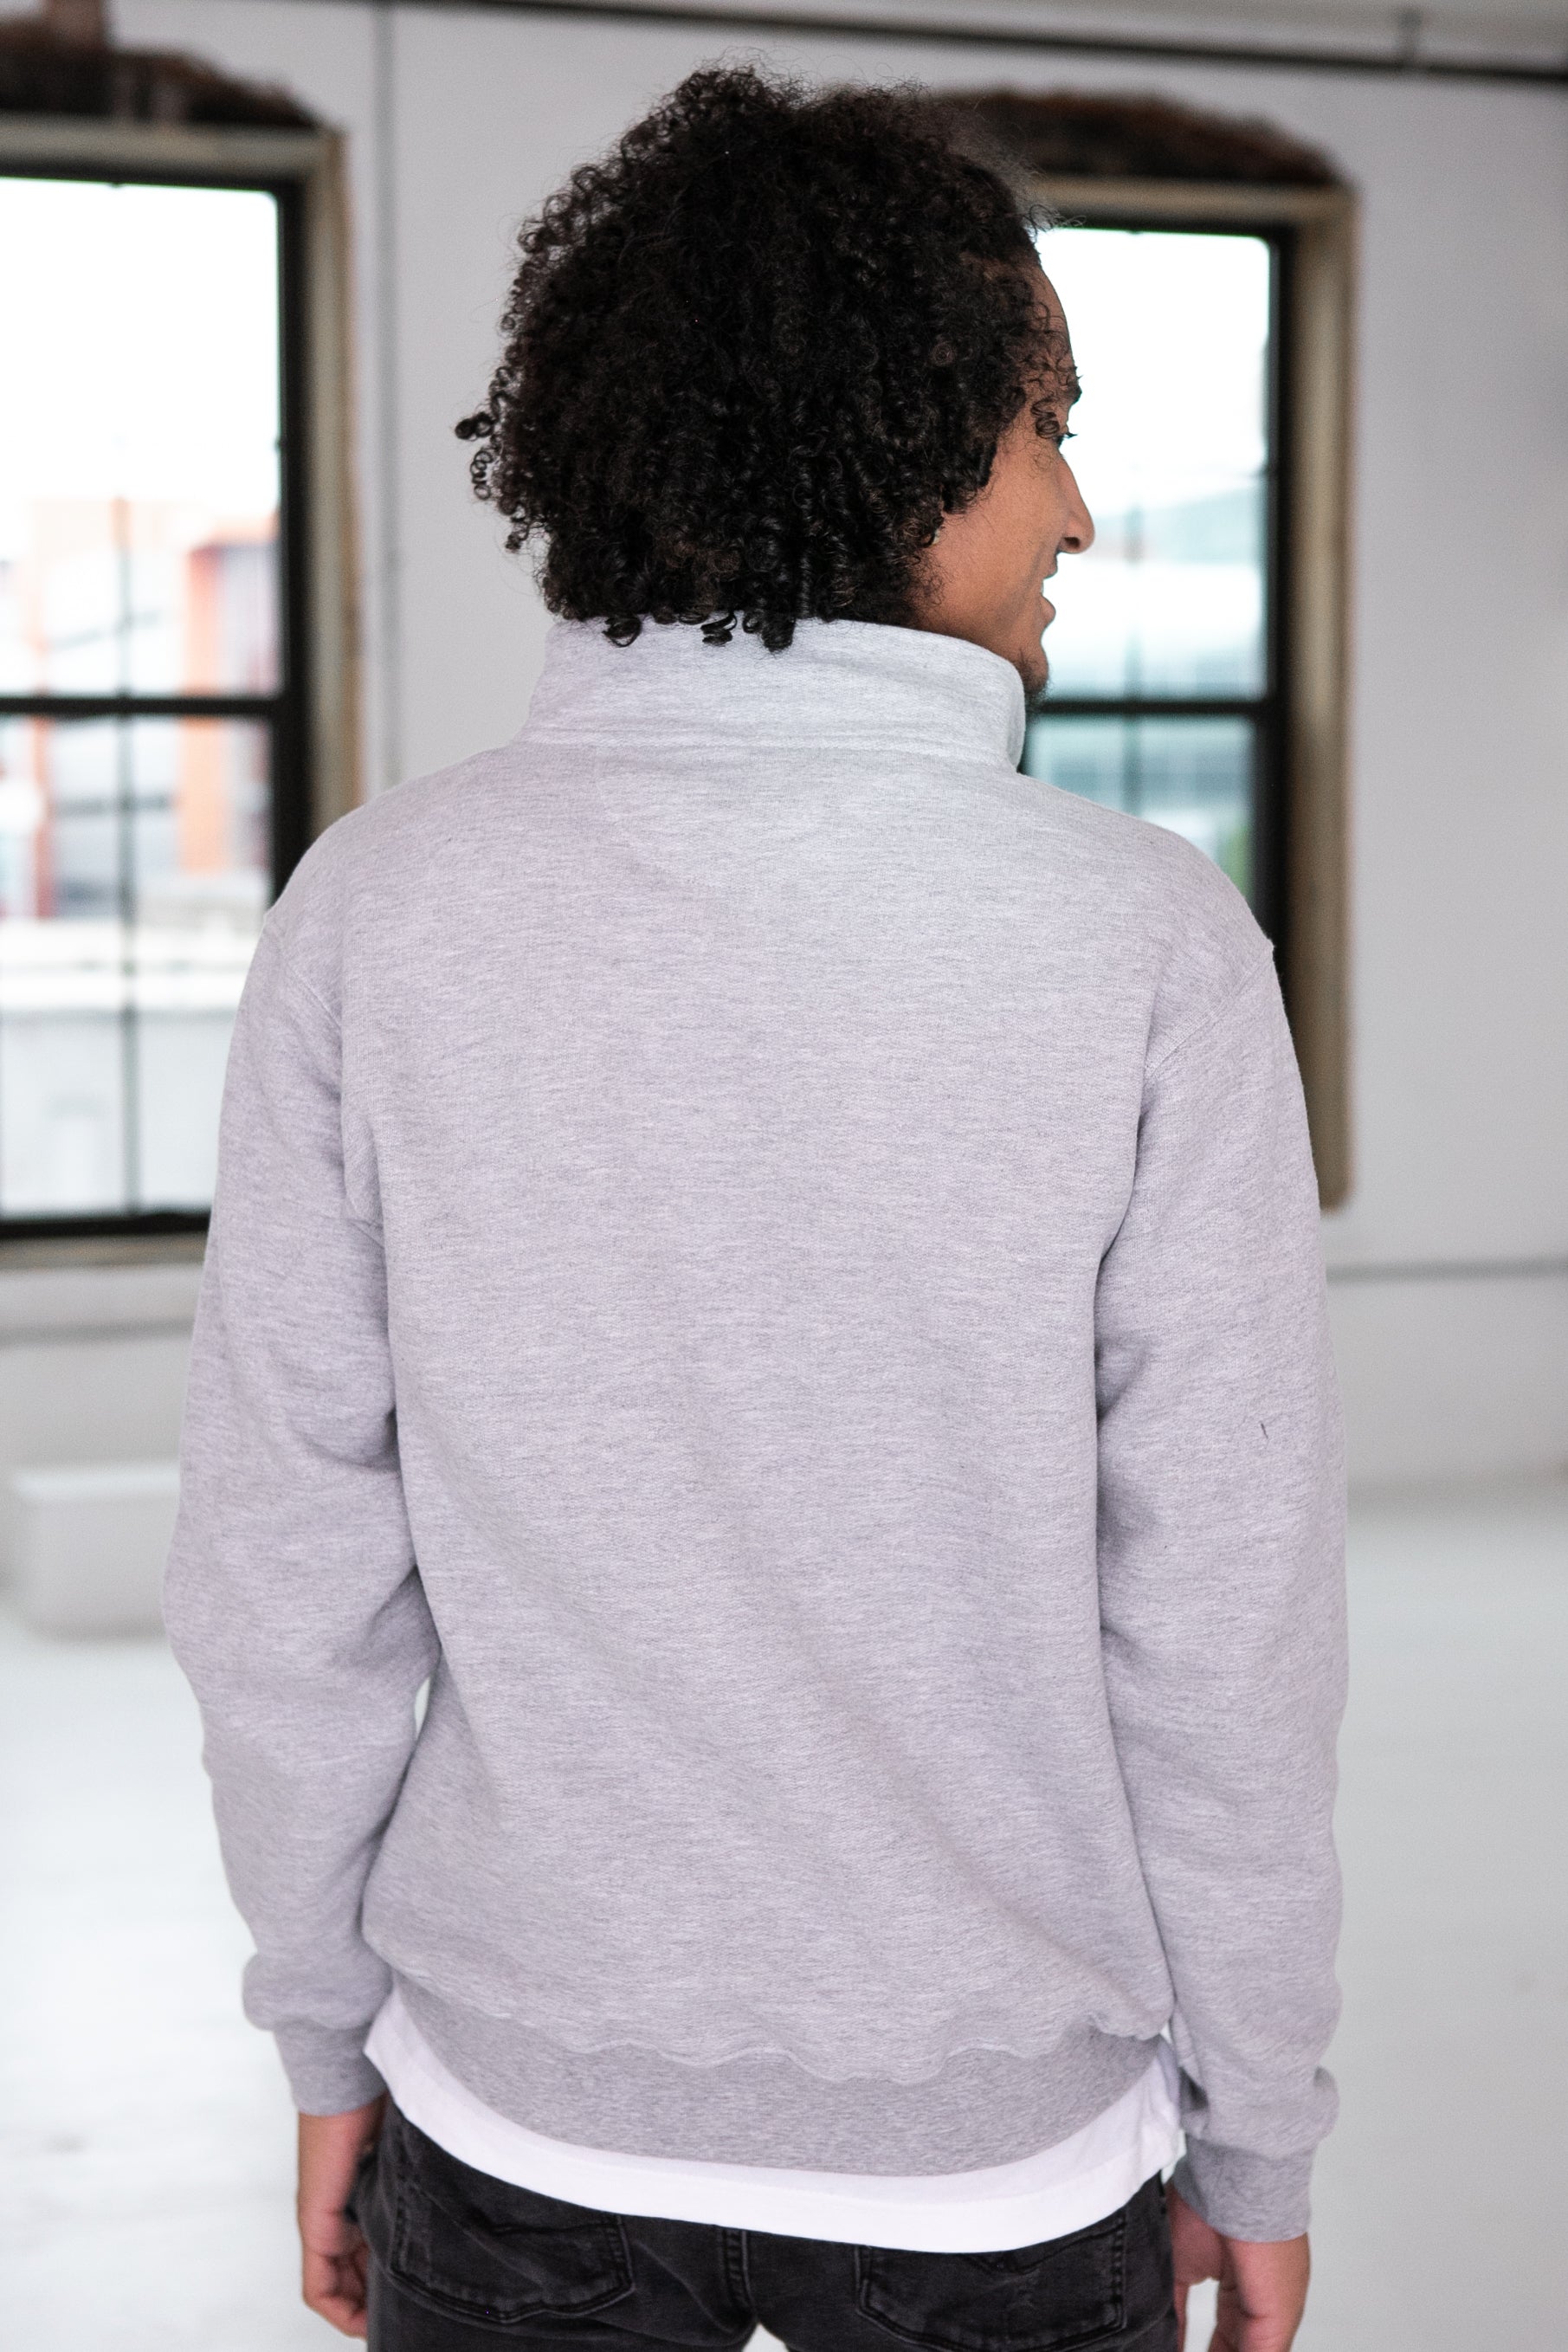 Elevate your style with a men's soft grey long sleeve quarter-zip pullover, perfect for casual sophistication. Available to add to your custom gift box at Me To You Box.